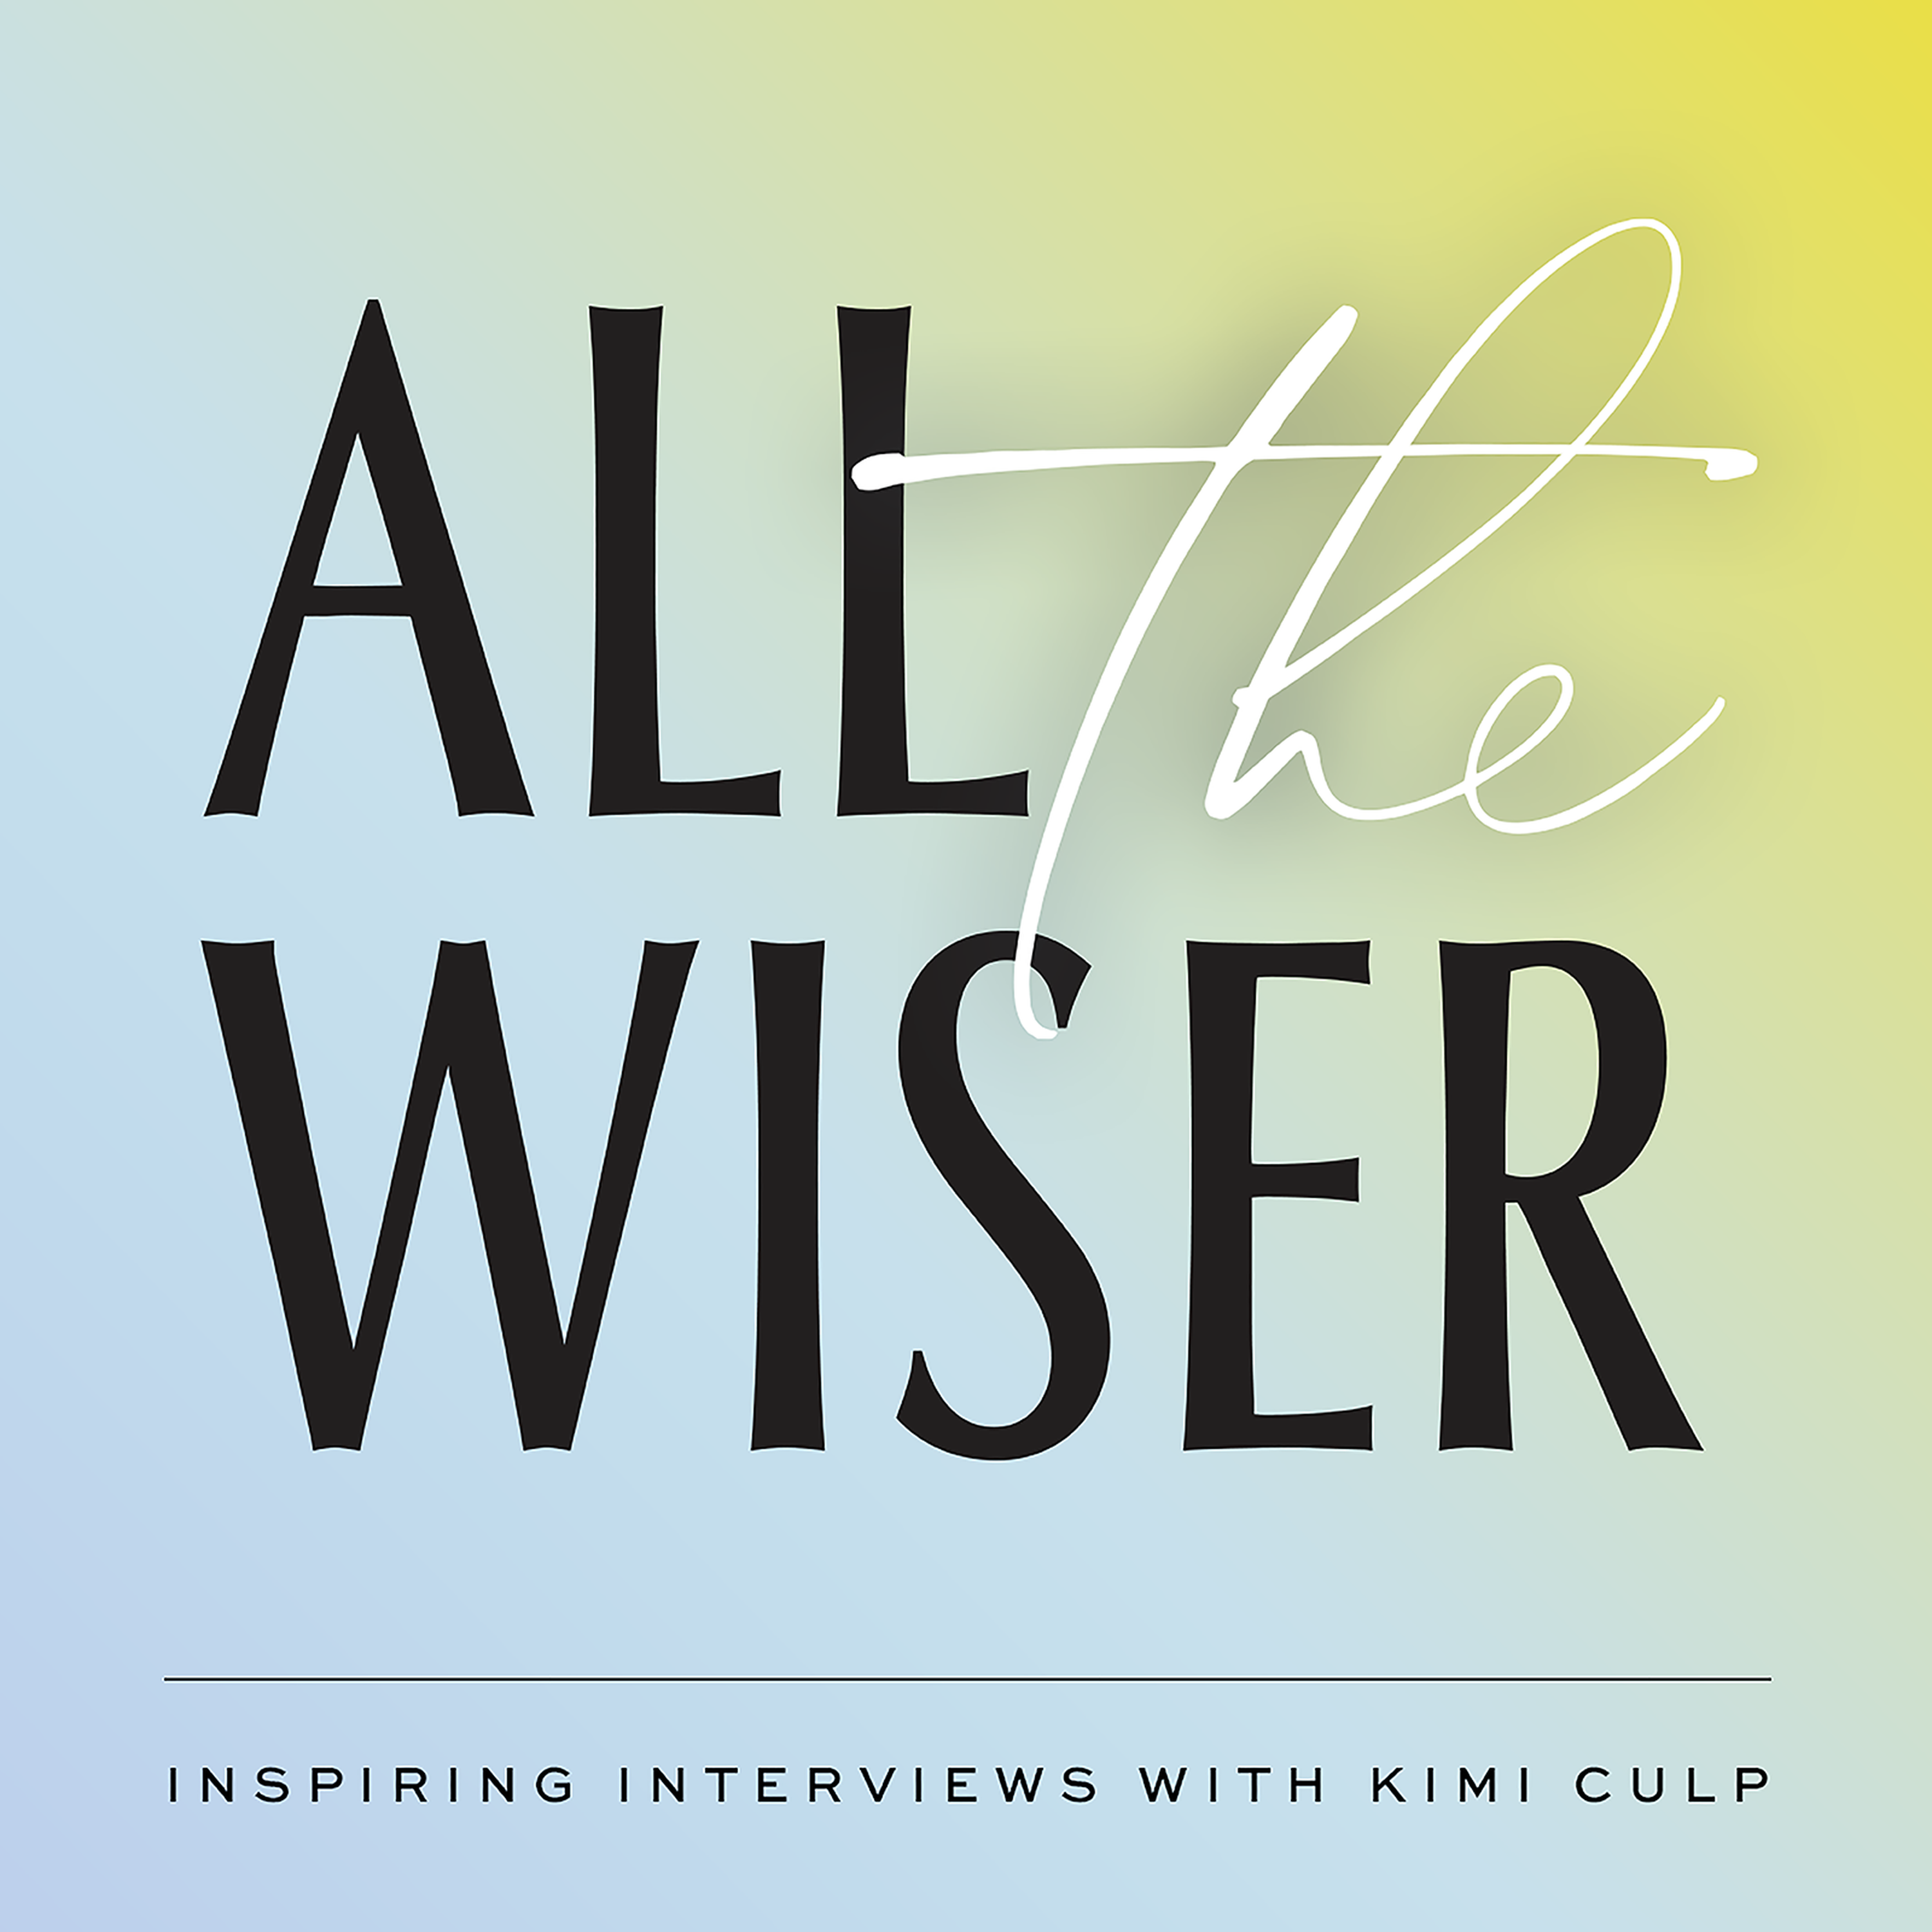 A Little Wiser: The stories we tell ourselves